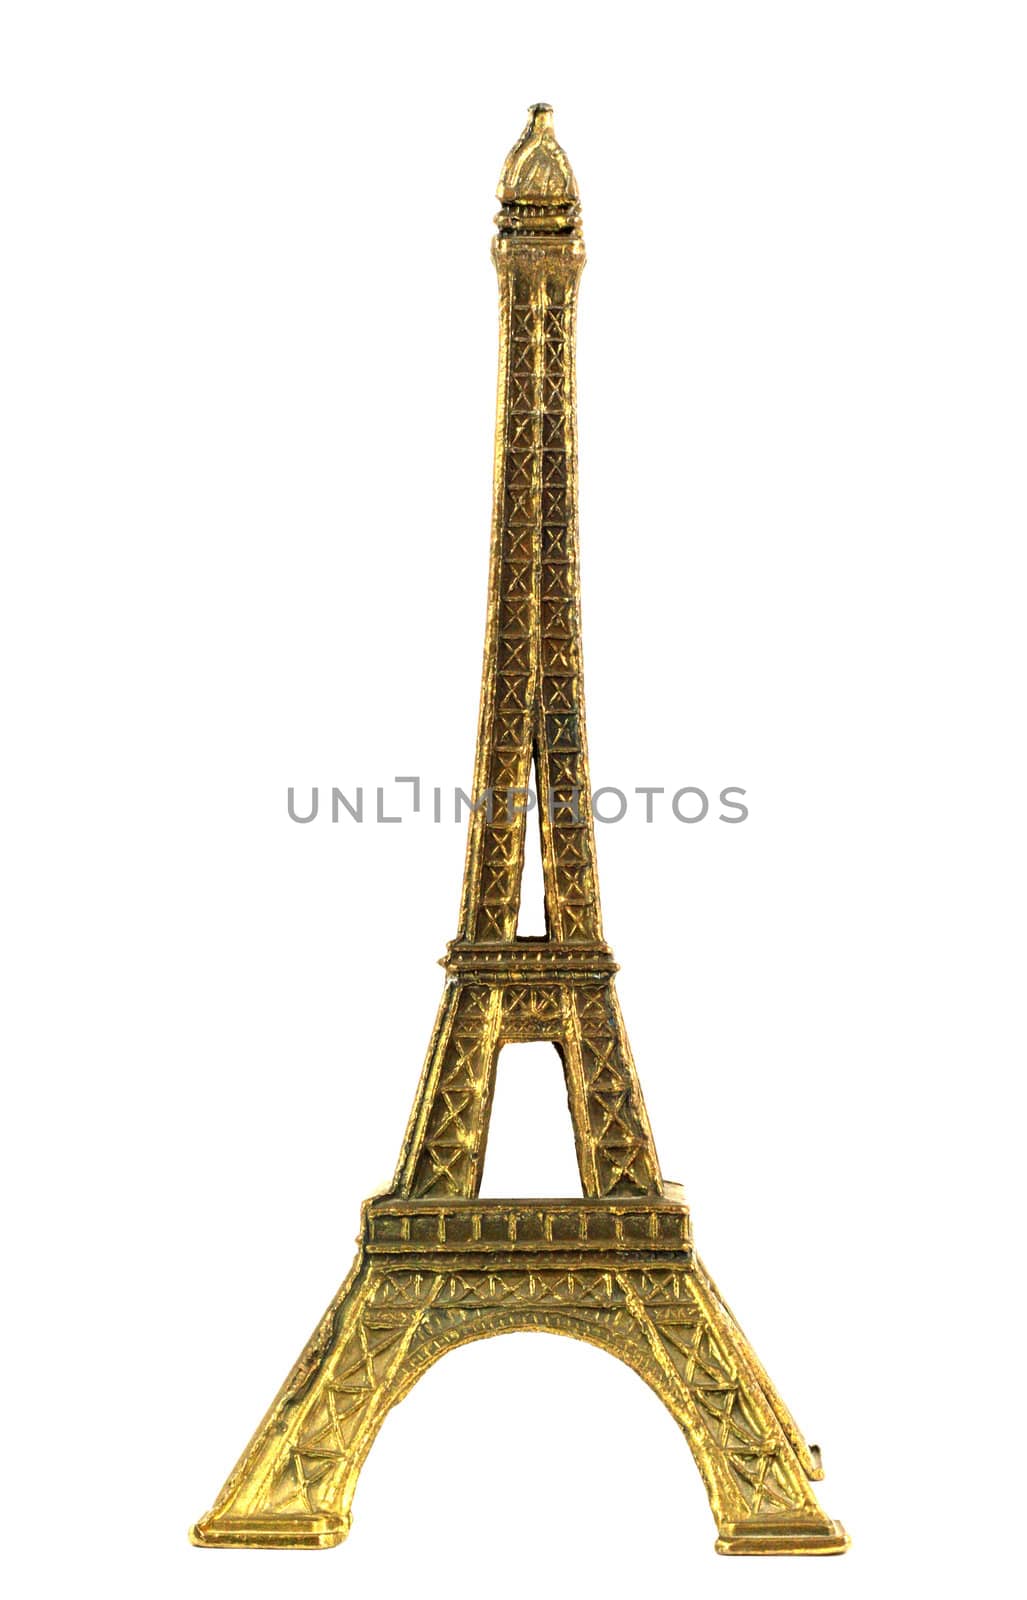 Eiffel tower minature isolated in white